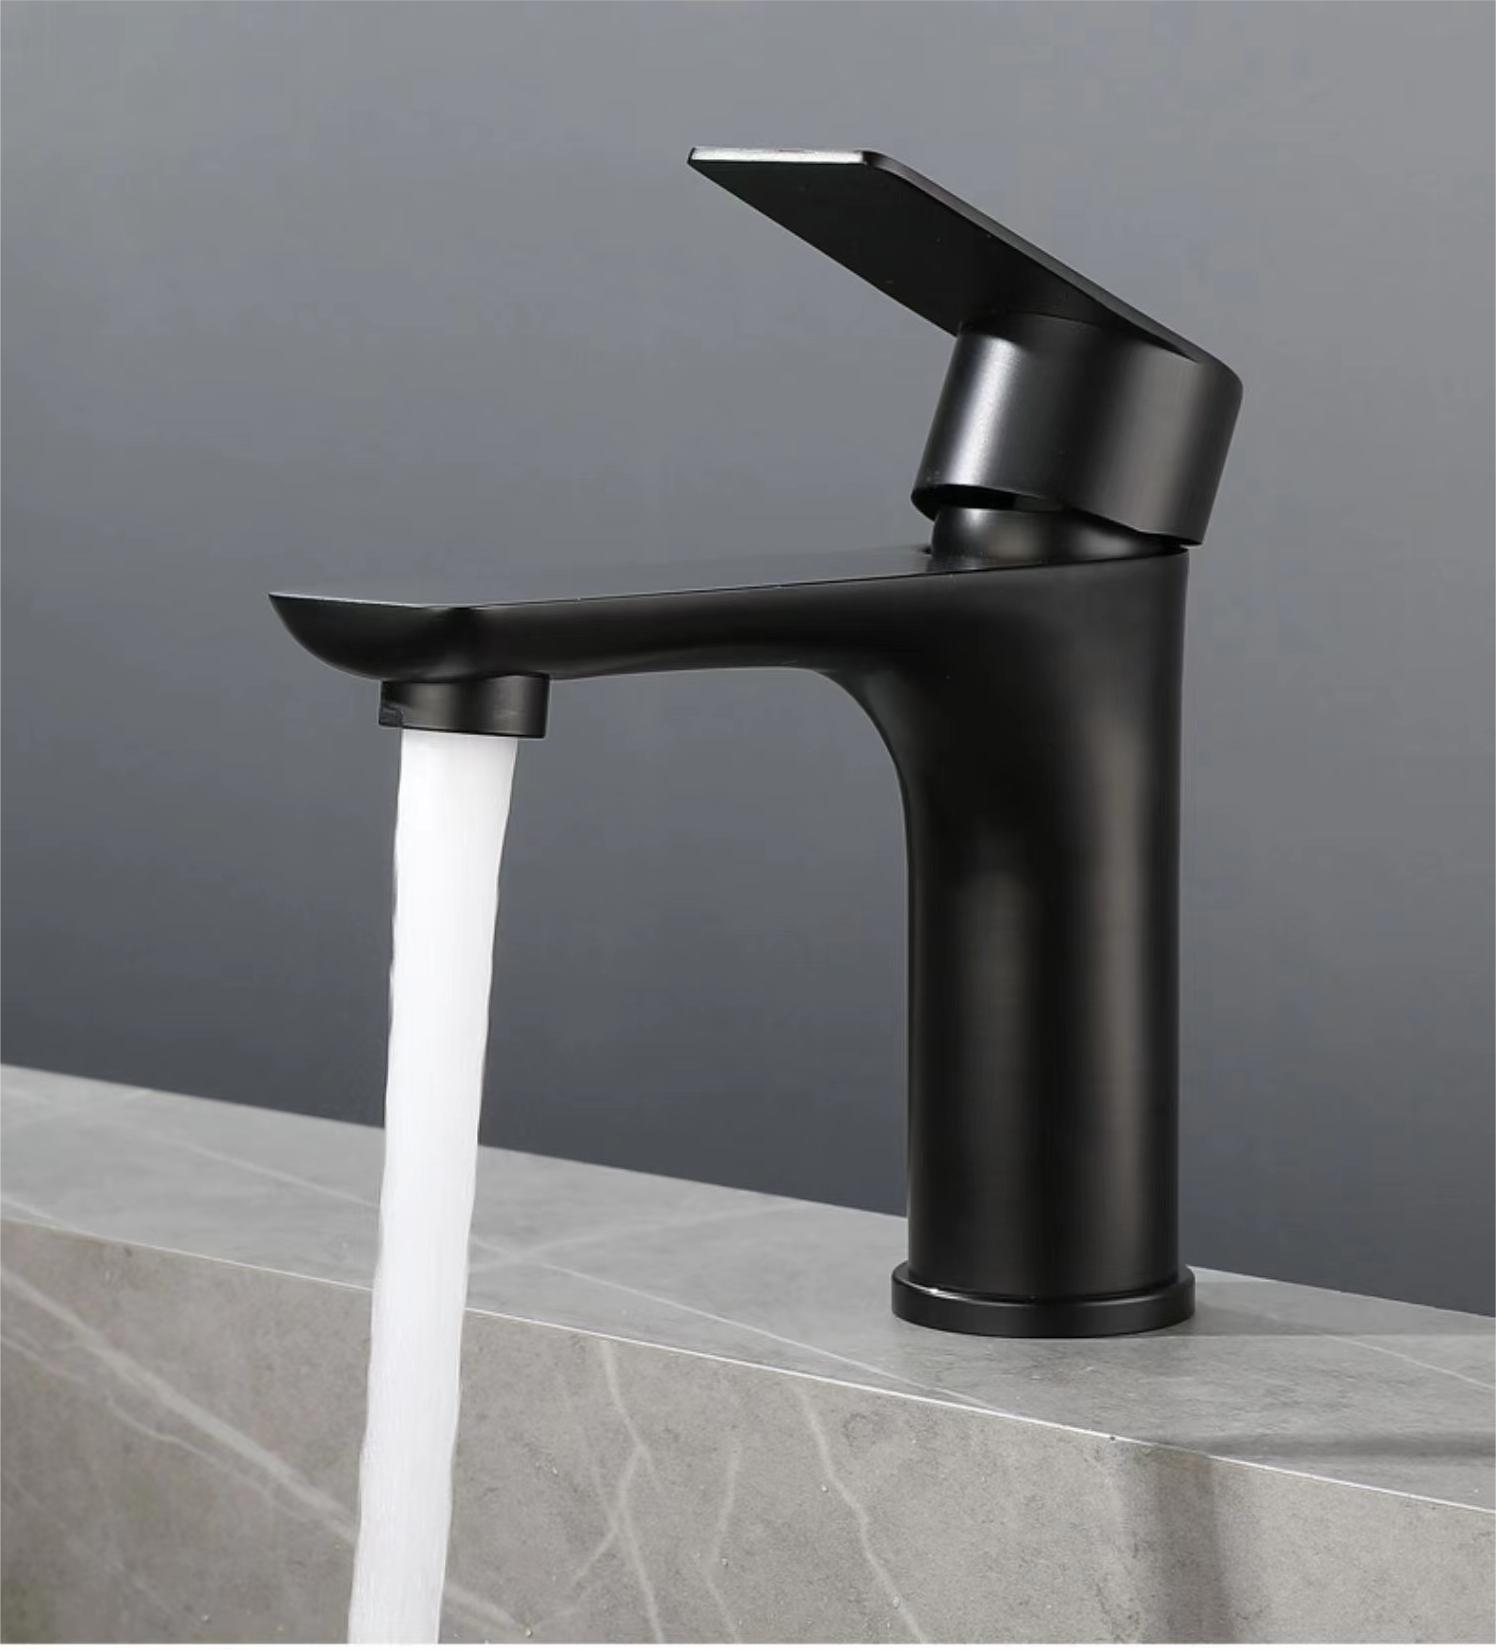 Gun Gray Black 304 Stainless Steel Hot and Cold Faucet Flat Single Hole Washbasin Basin Bathroom Basin Faucet Water Tap